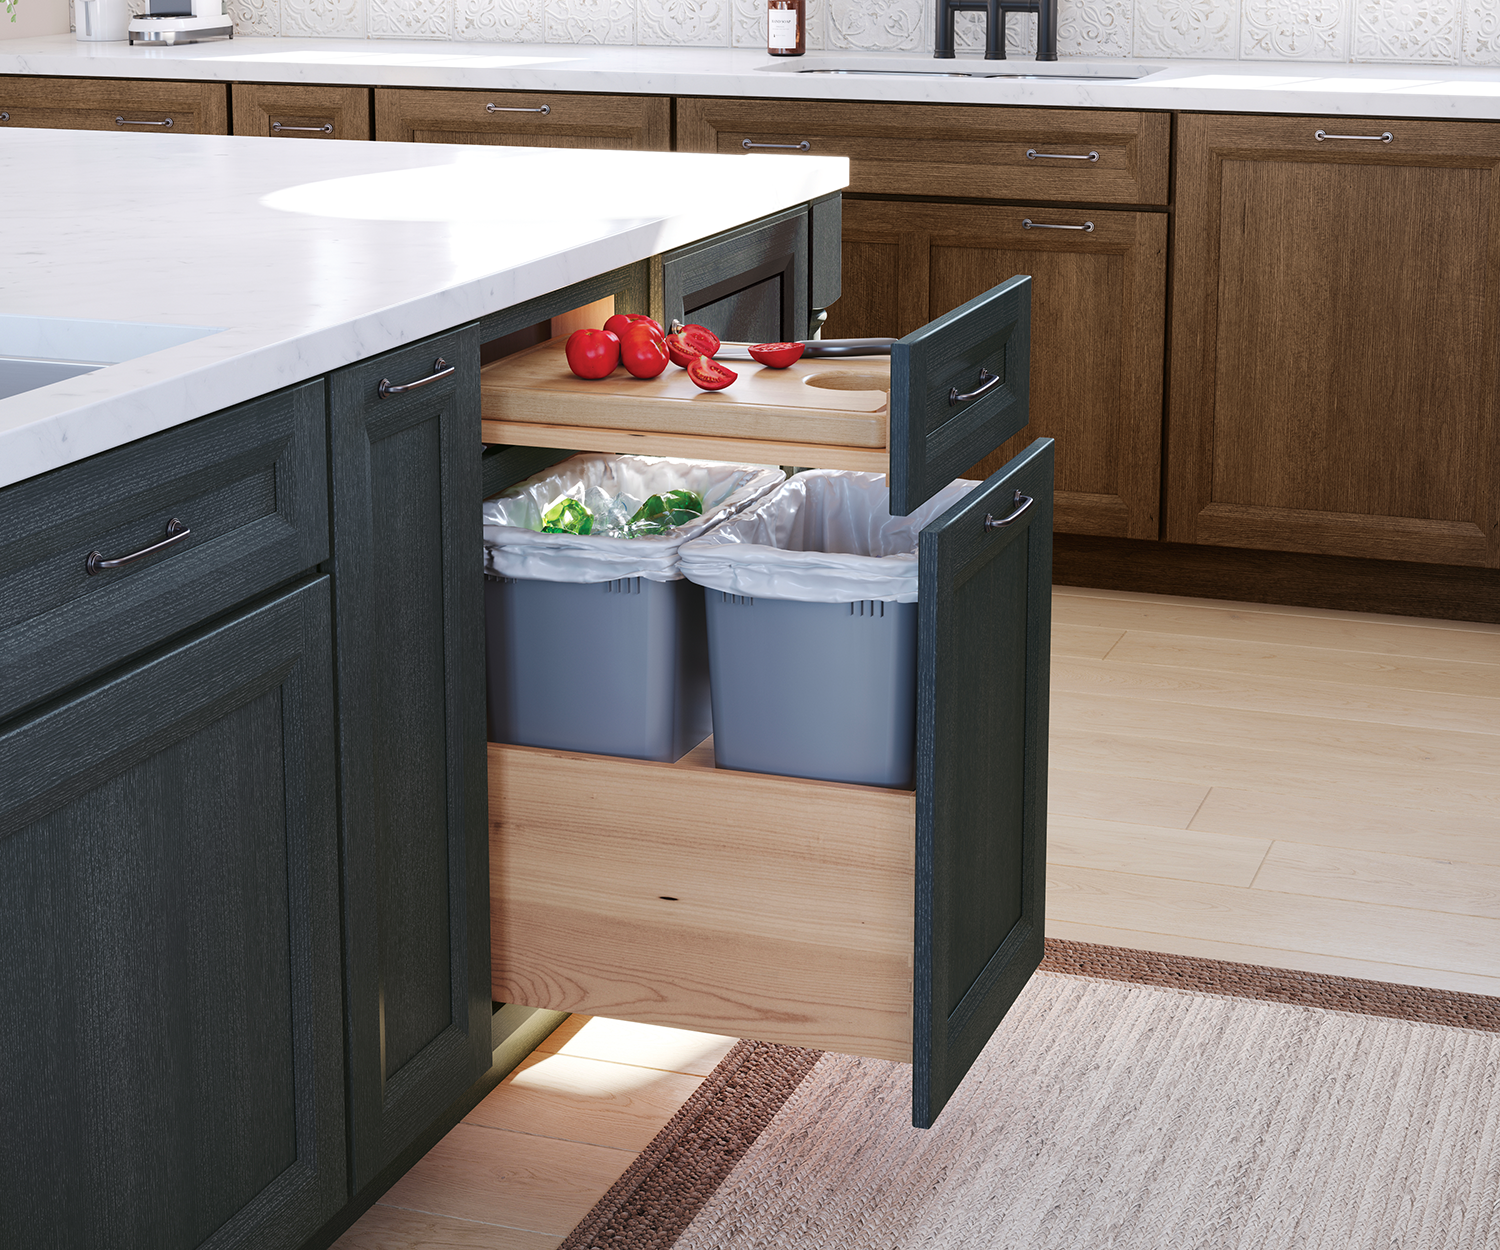 An image of a kitchen showcasing a sink, a drawer with a trash can, and practical integrated chopping block.